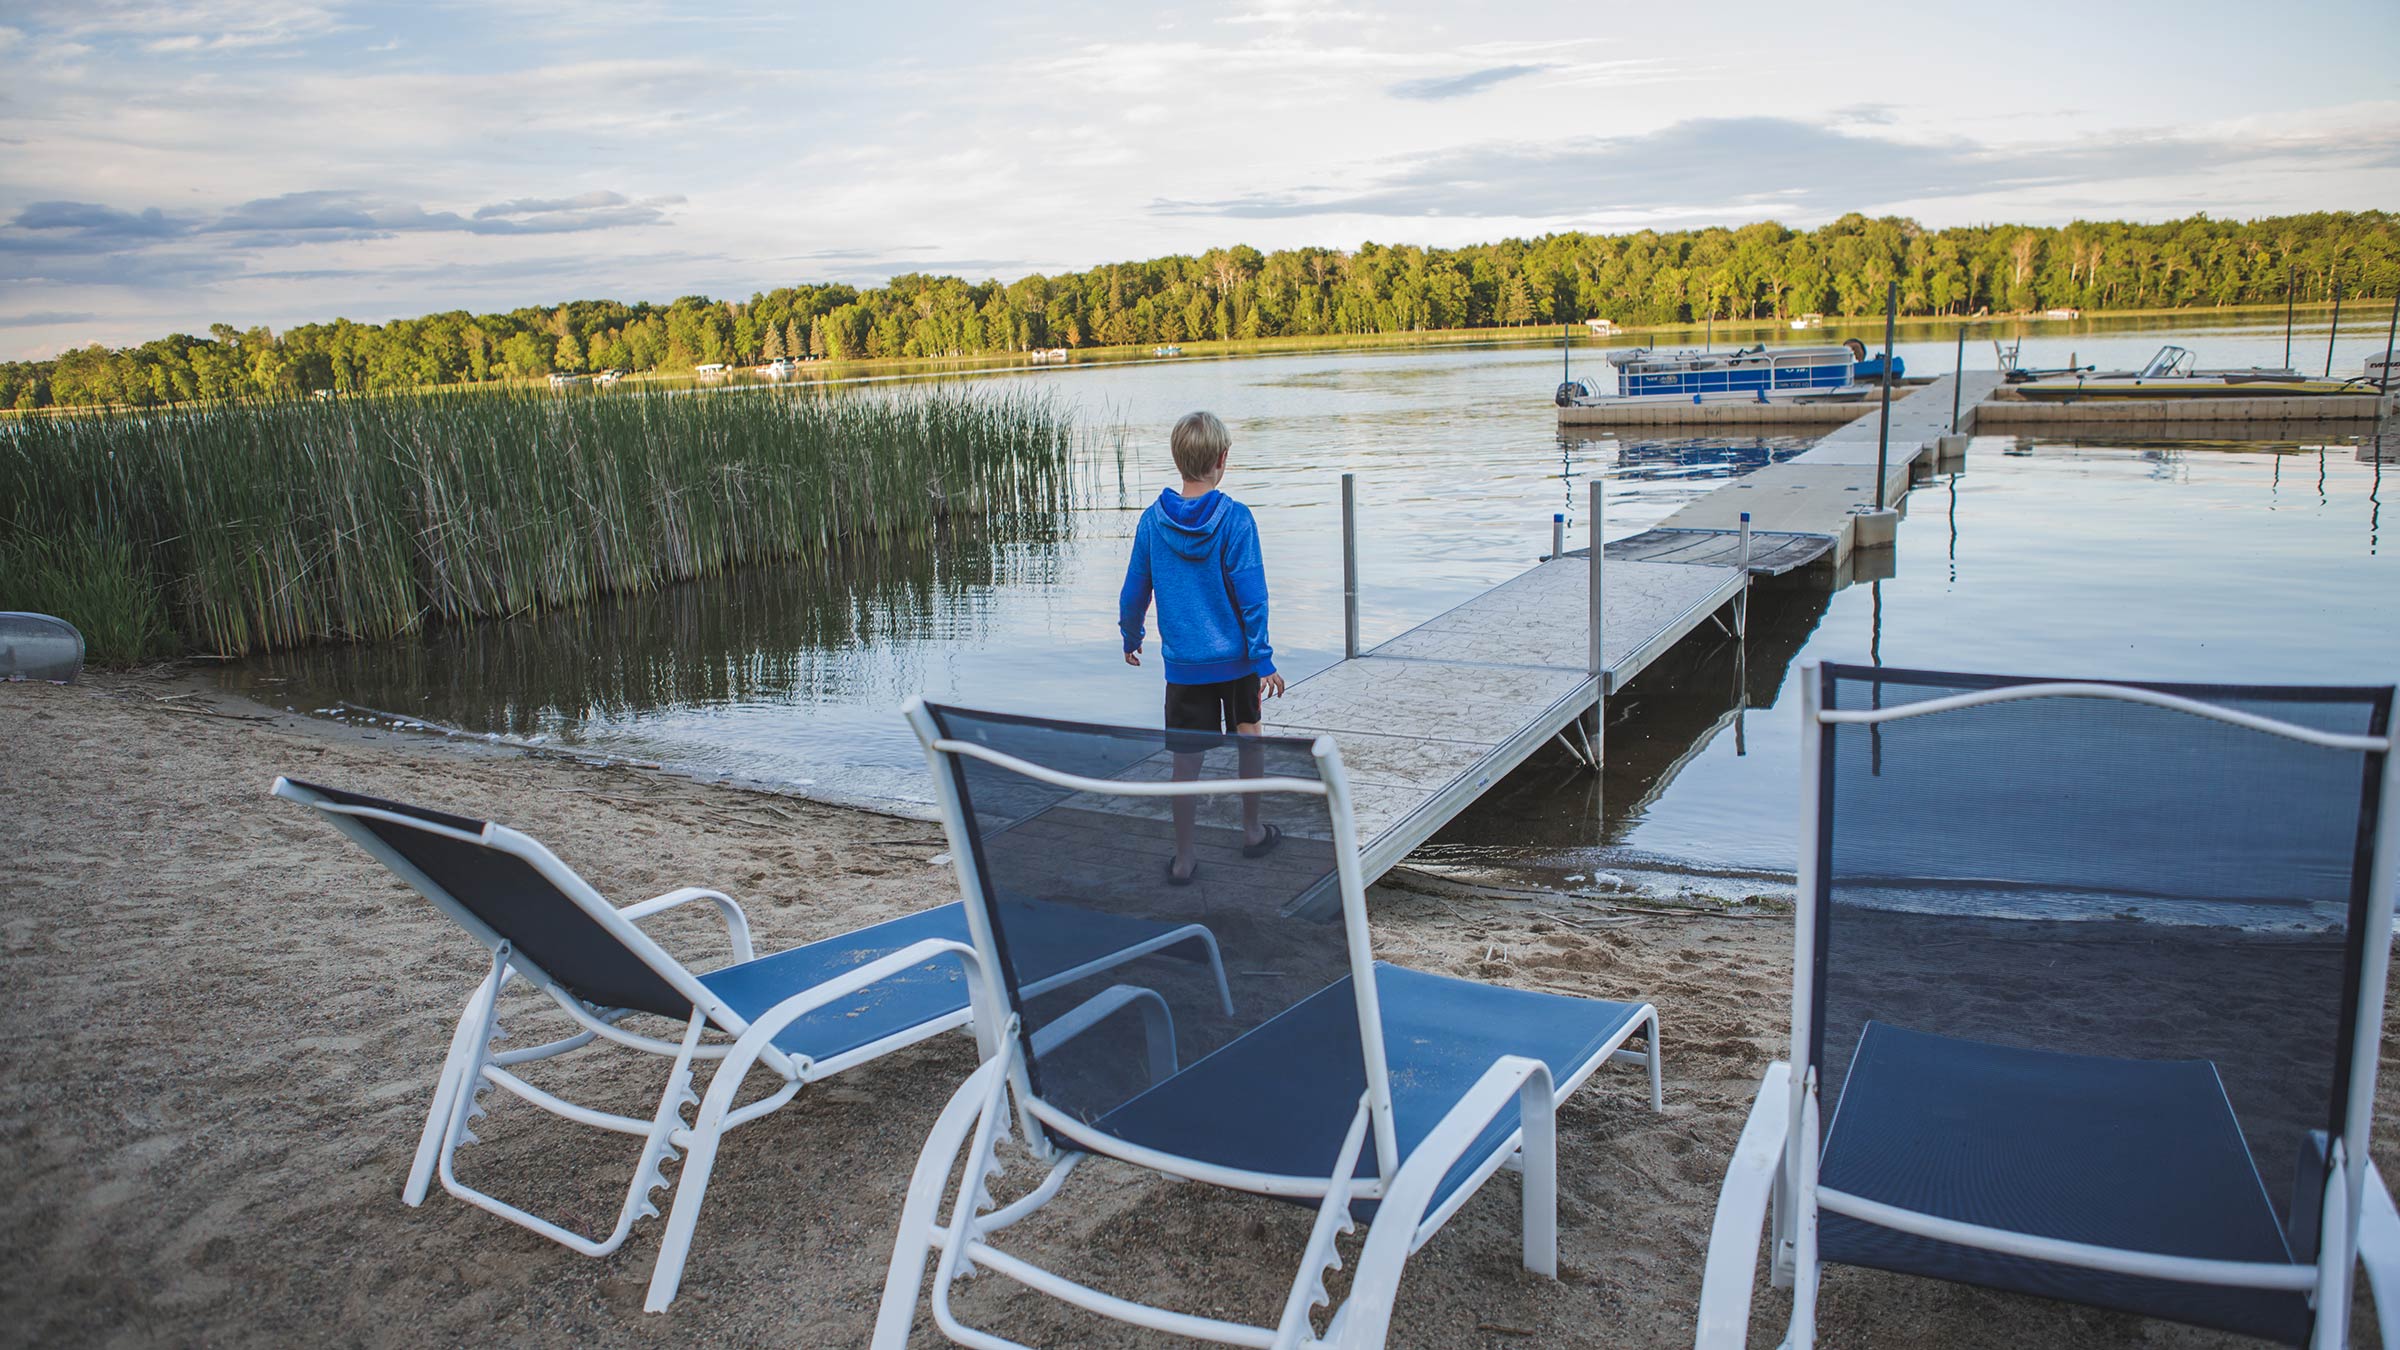 Minnesota hospitality firms struggling, but 10,000 lakes helping some key image